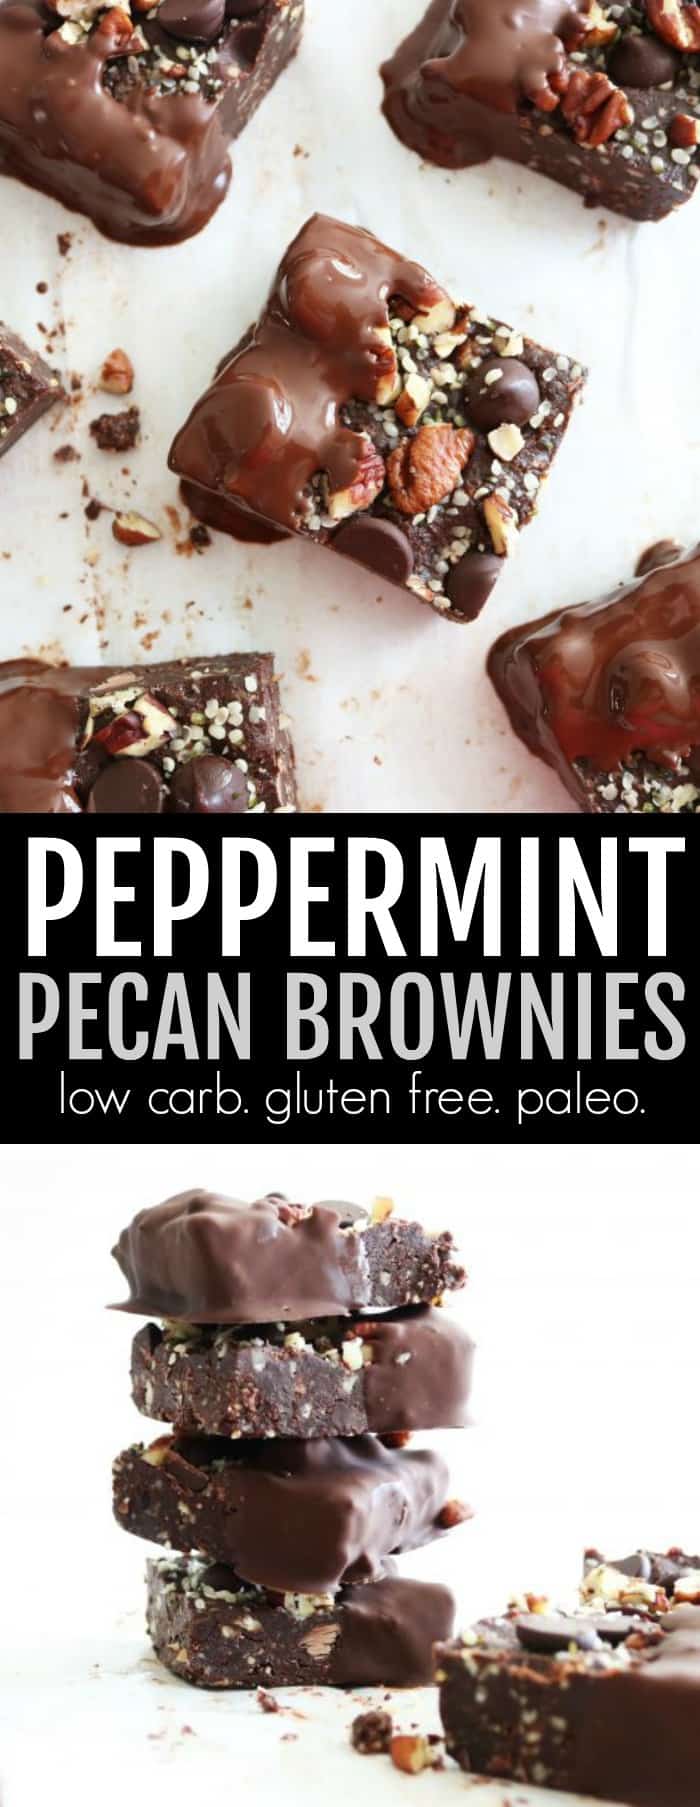 The most delicious no-bake Peppermint Pecan Brownies you'll ever eat!! Super delicious treat you can feel good about! Plus they're low carb and gluten free! thetoastedpinenut.com #lowcarb #glutenfree